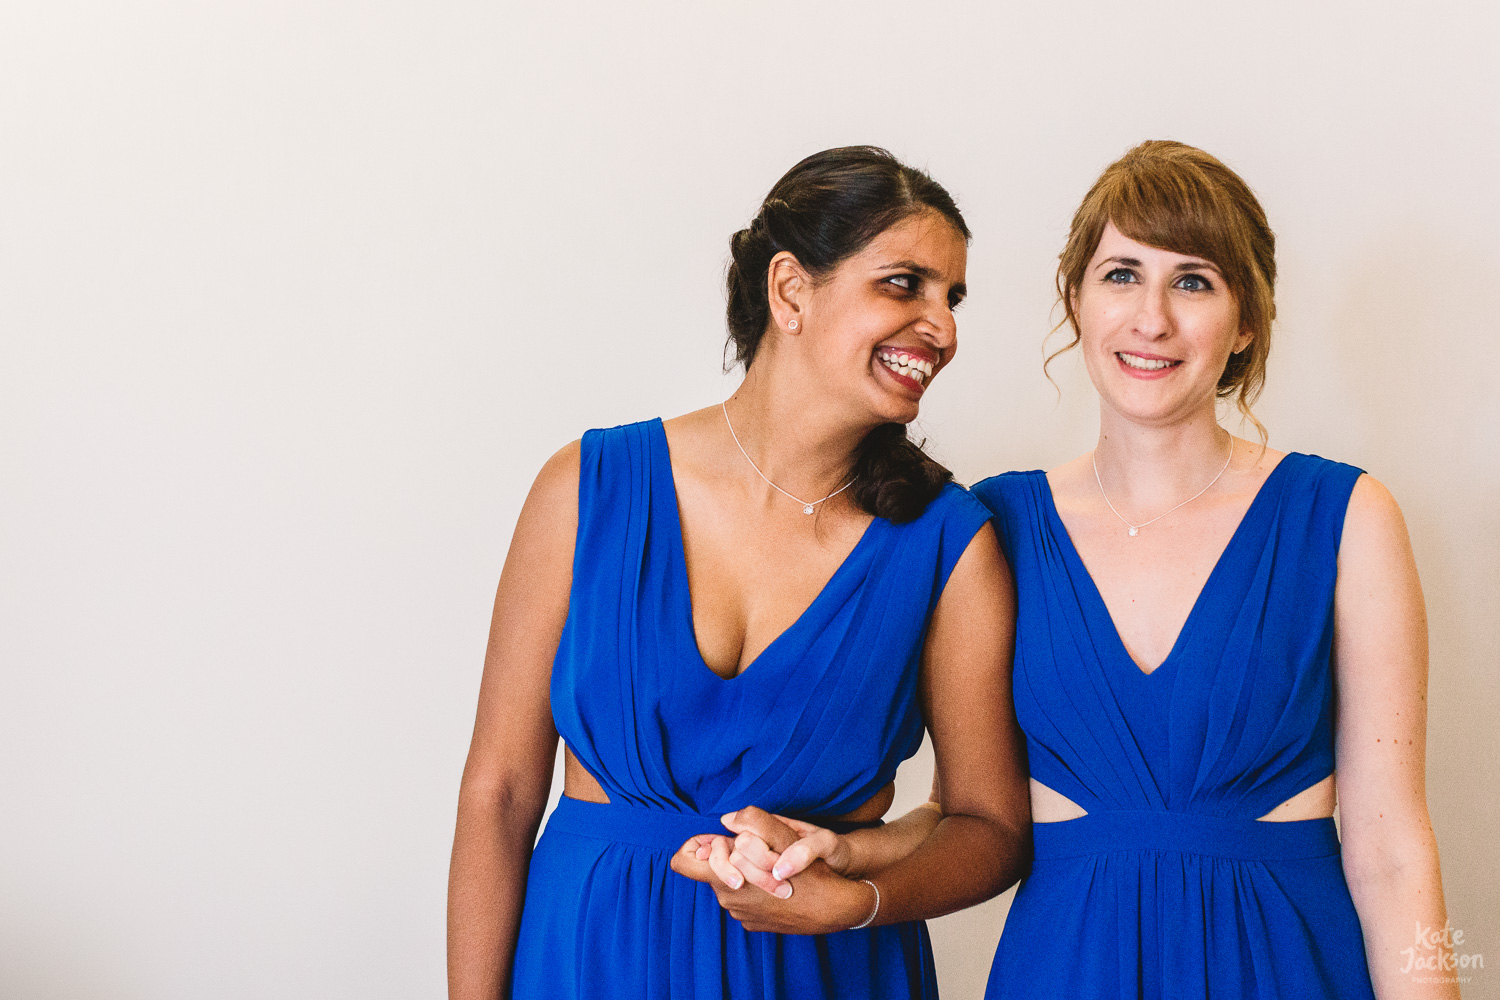 Electric Blue Bridesmaid dresses from ASOS for beach wedding in Skiathos